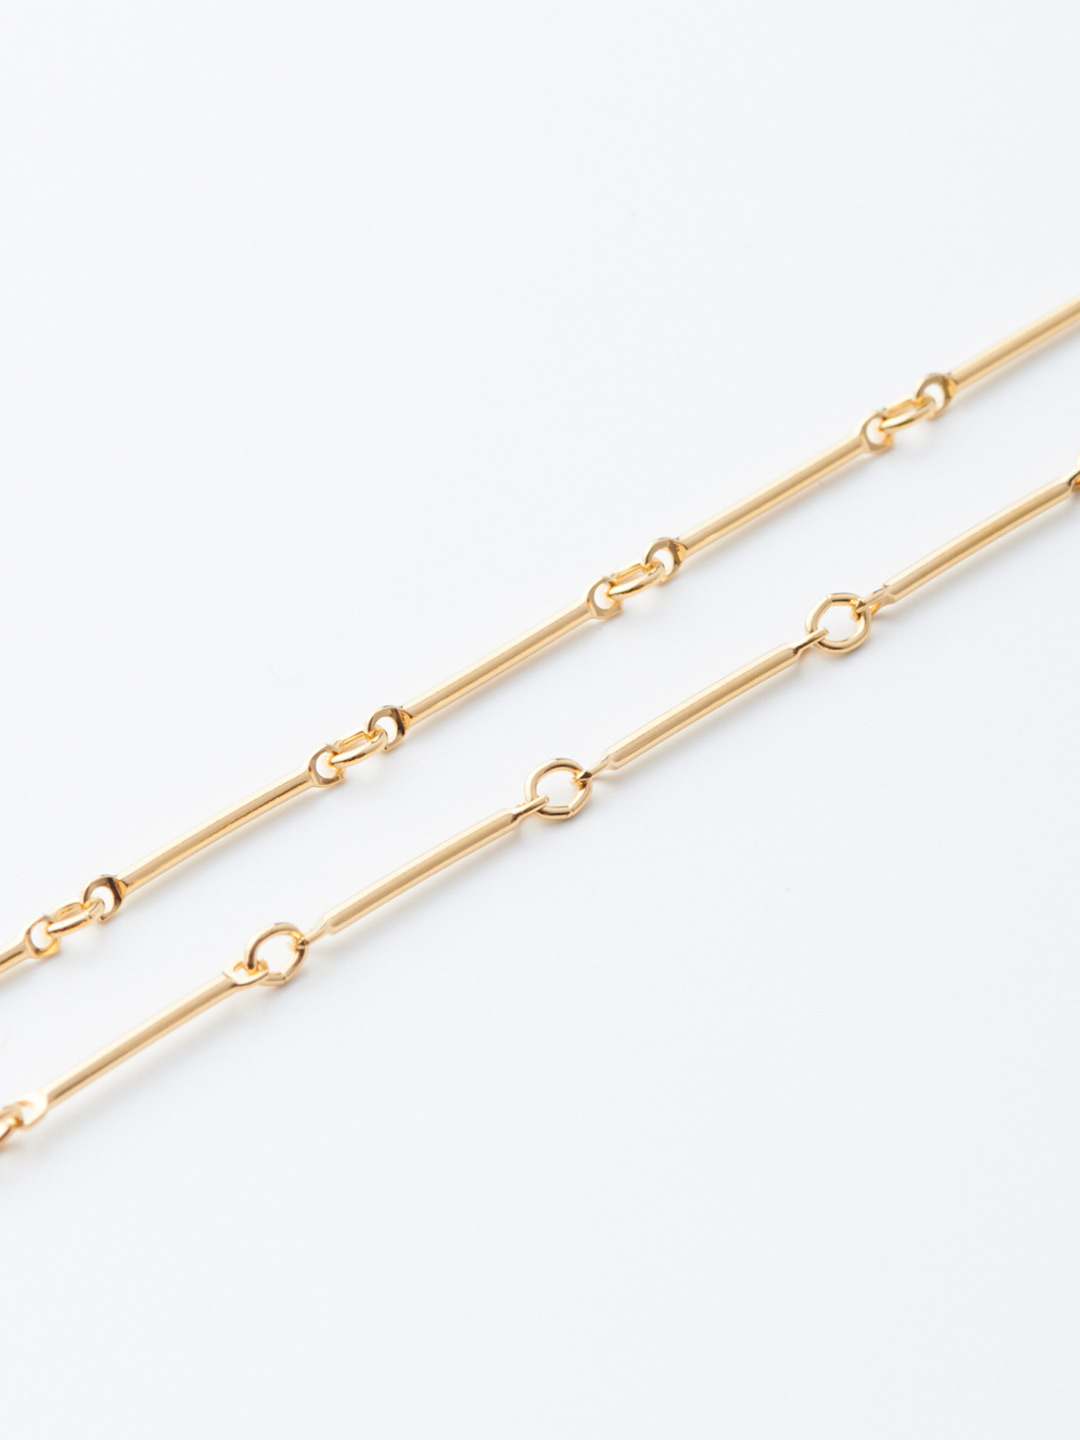 Bar Chain Necklace / 40cm - Gold